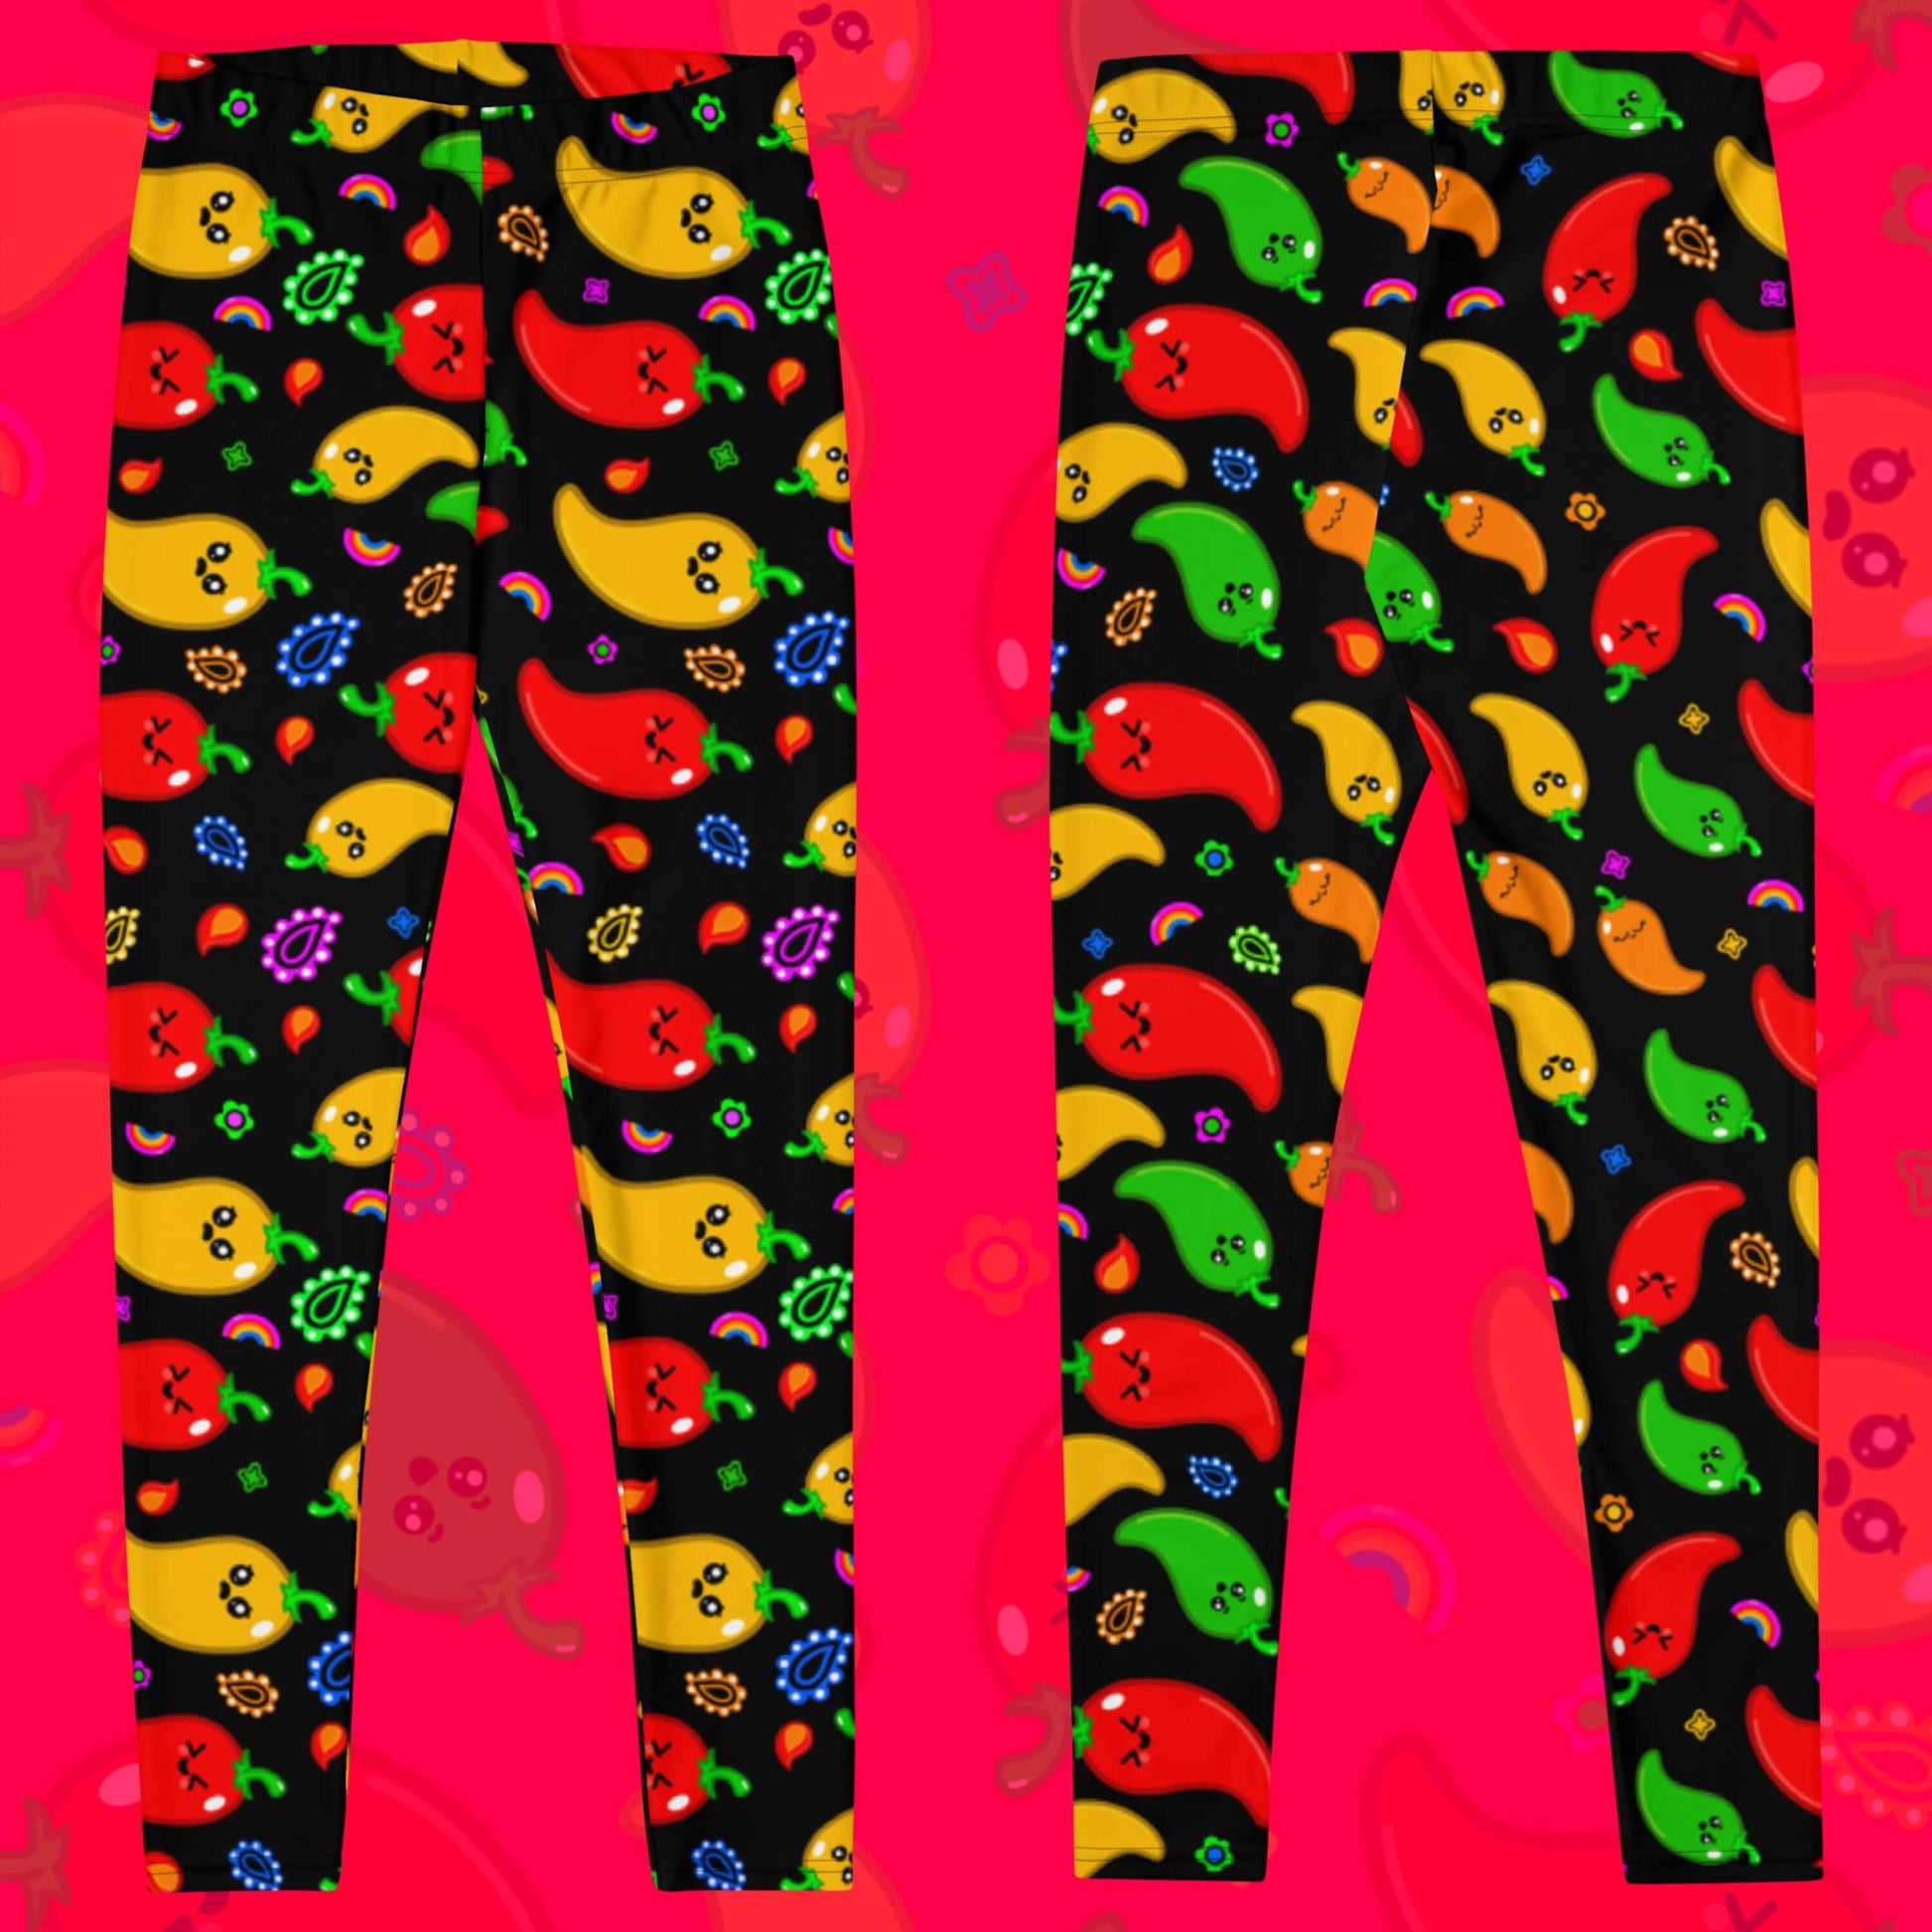 Black leggings with red, green, orange and yellow chilli peppers with cute faces on and various cute doodles around them. The background of the photo is a faded close up of the print. The hand drawn design is raising awareness for neurodiversity.